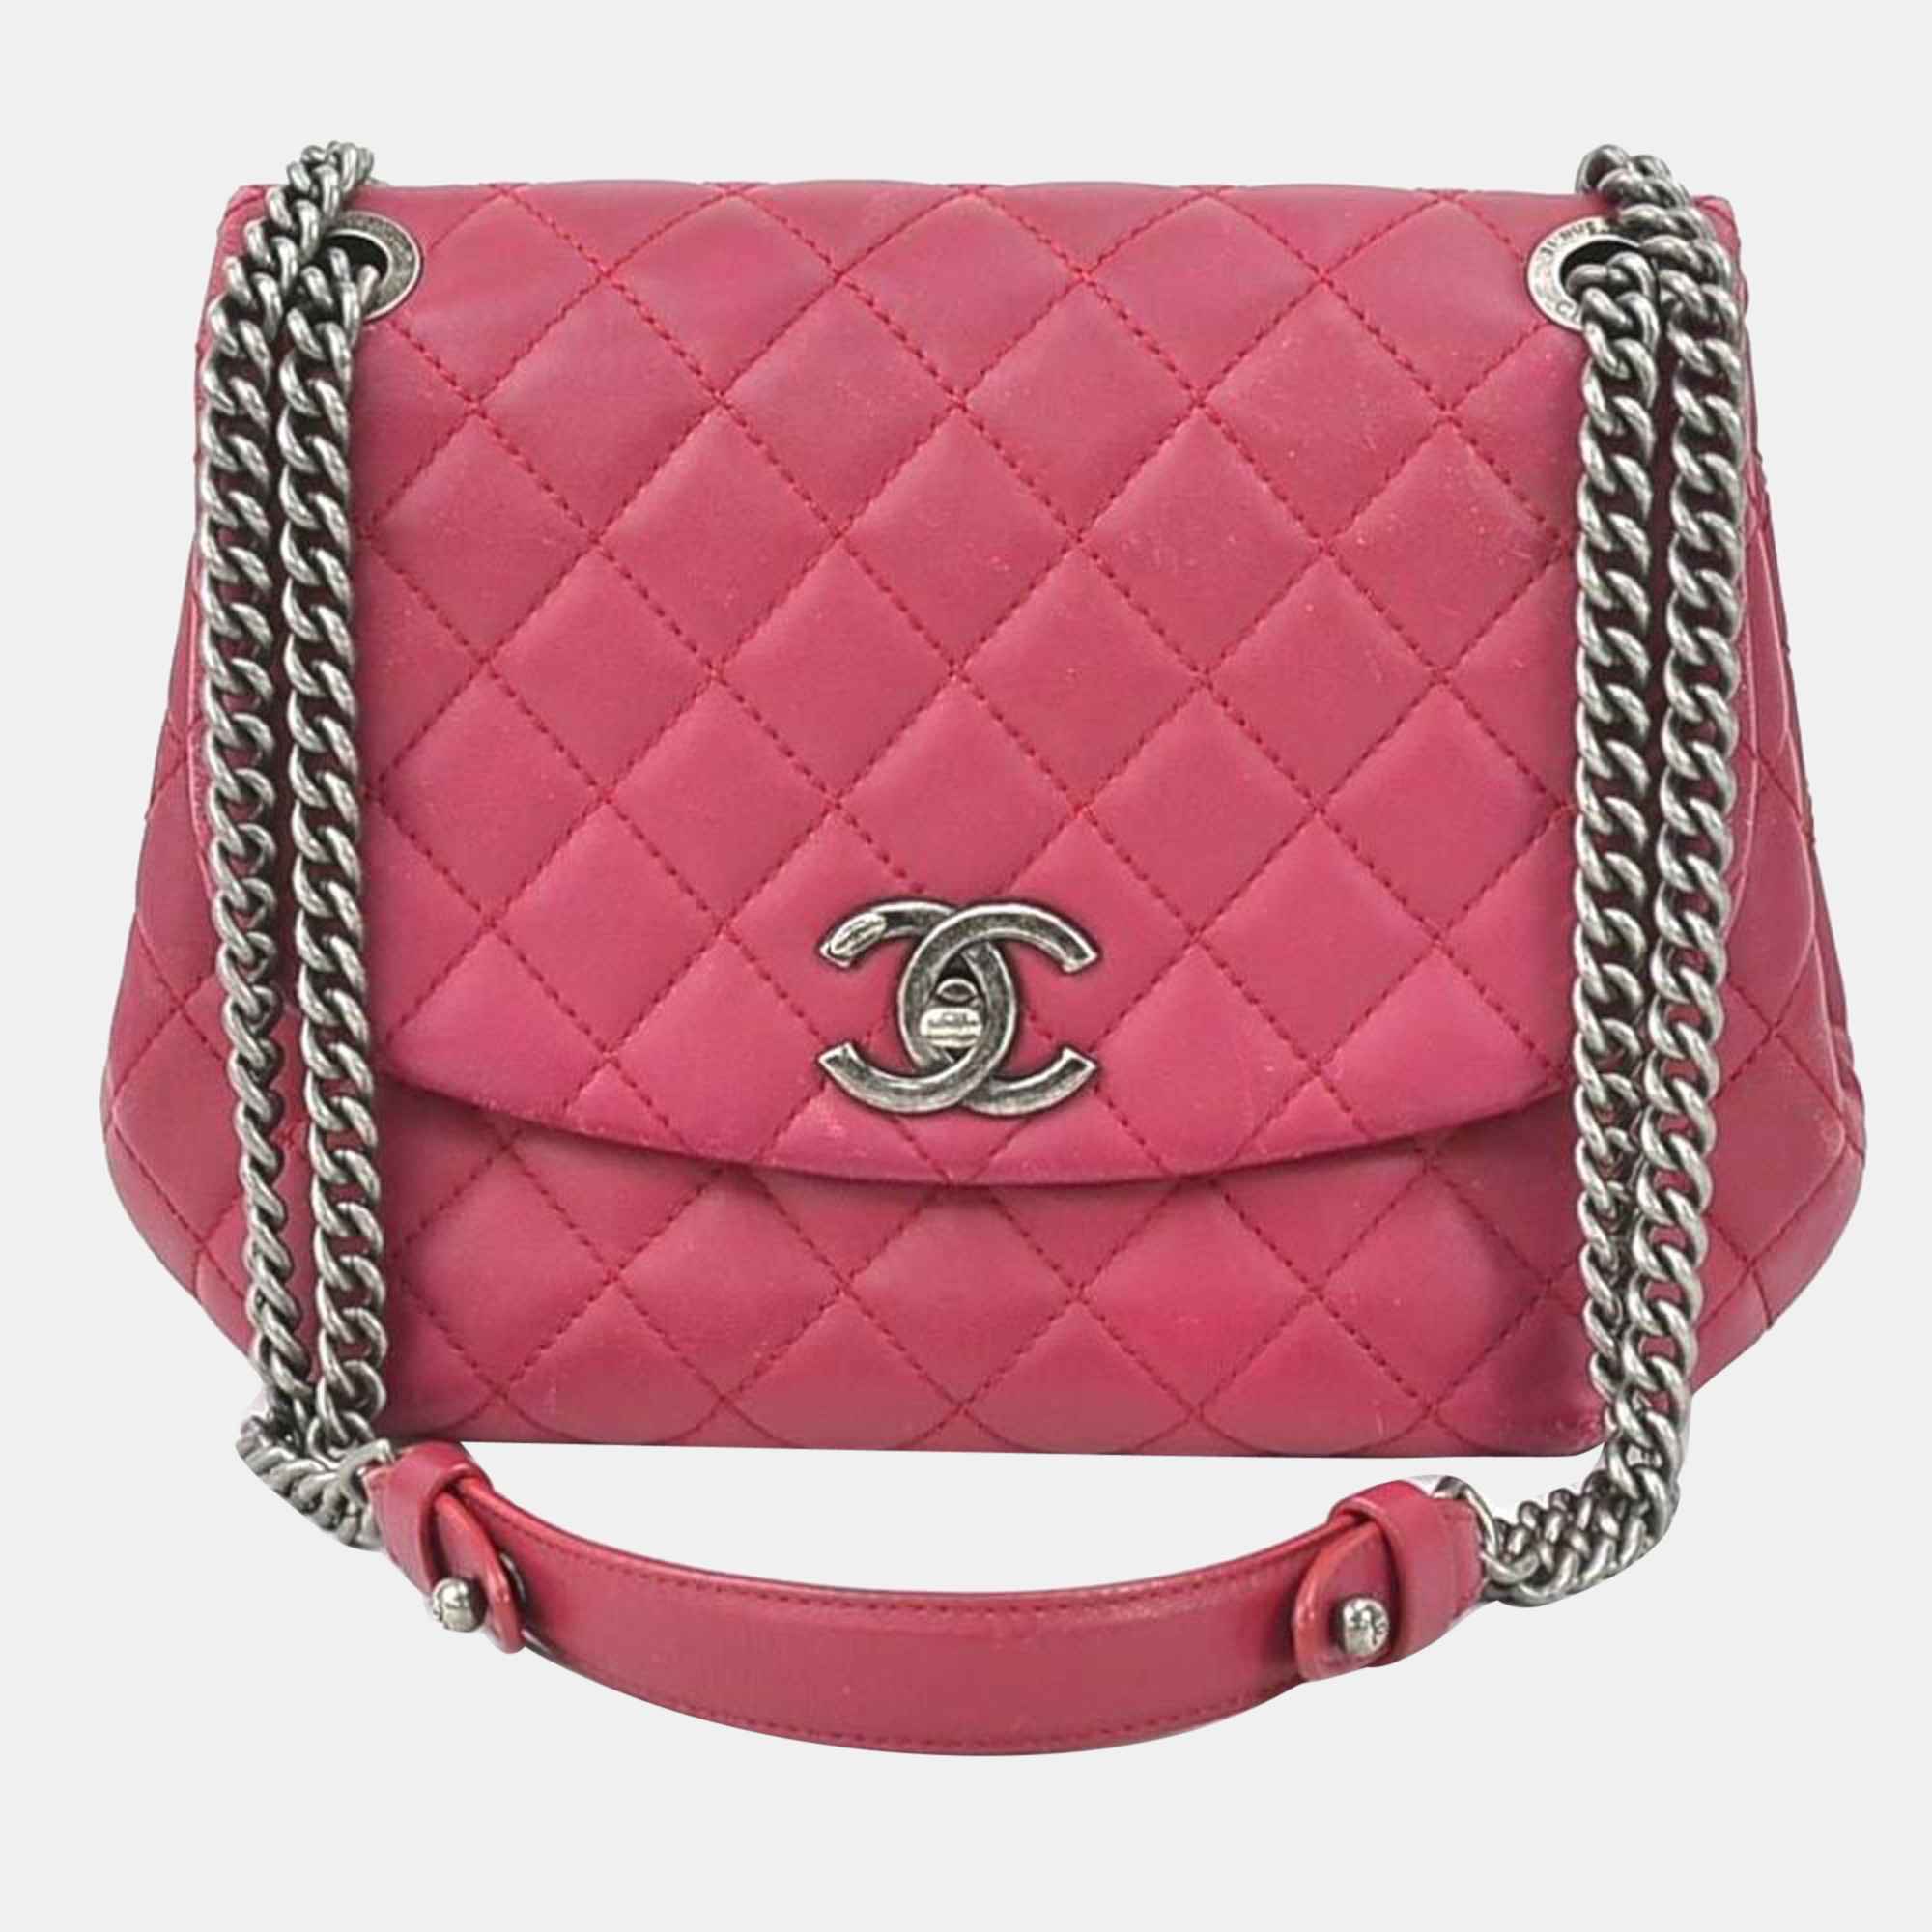 Pre-owned Chanel Pink Quilted Leather Diagonal Crossbody Bag